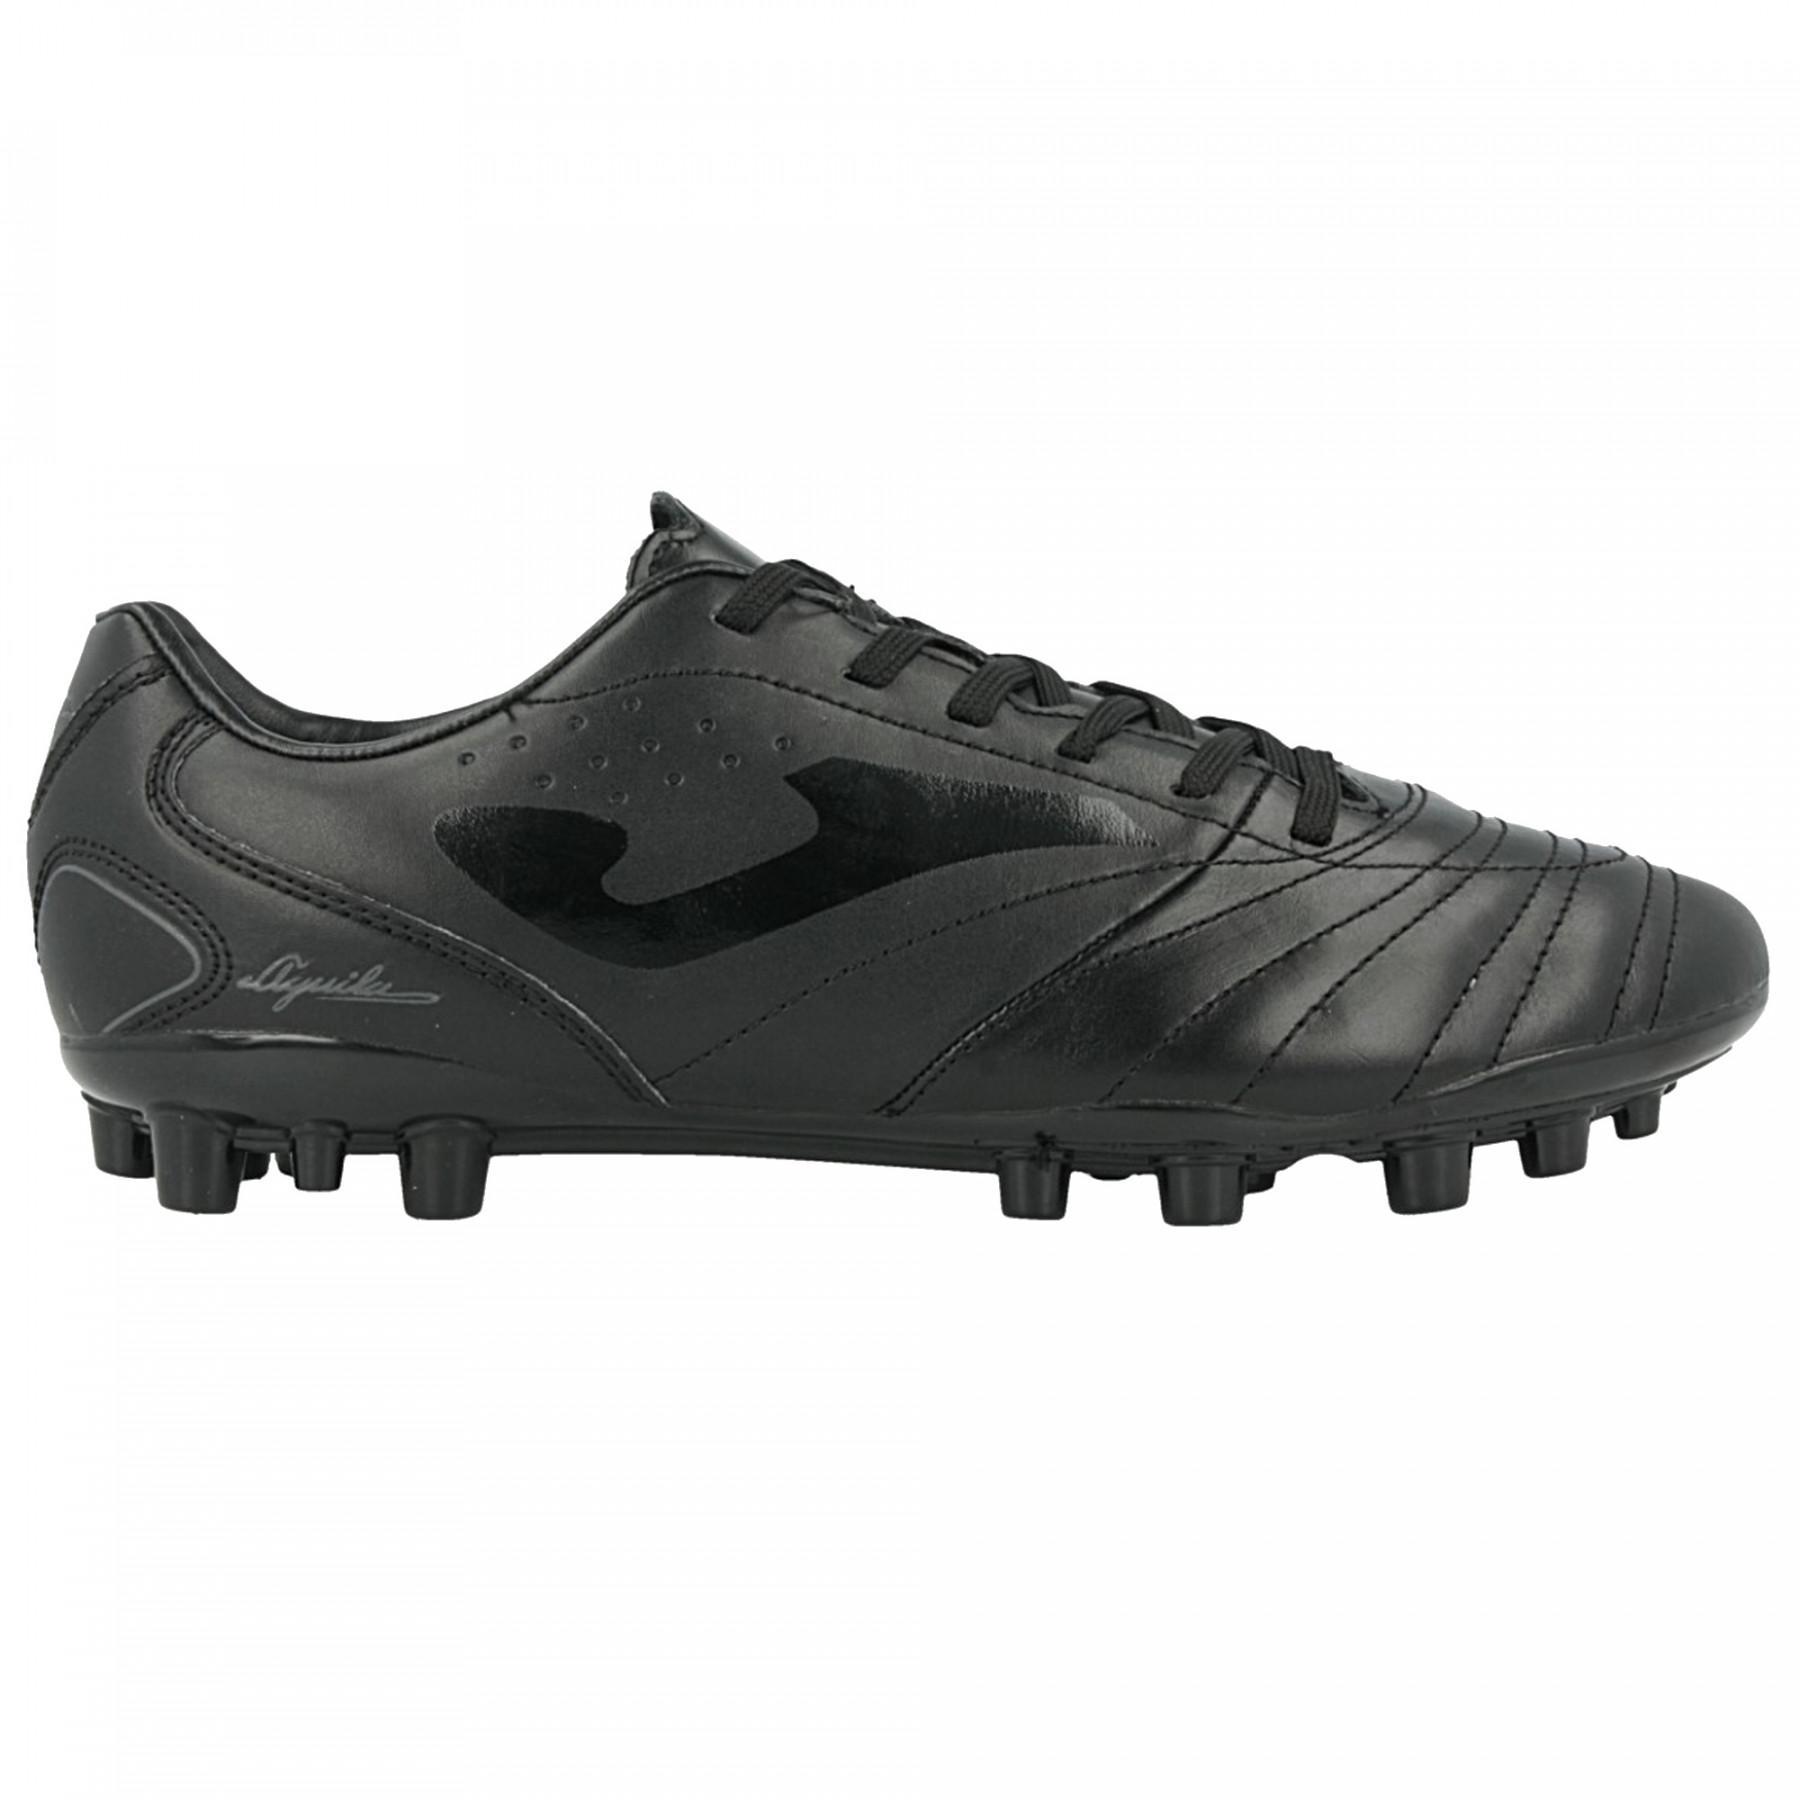 Chaussures Joma Aguila gol 821 AG